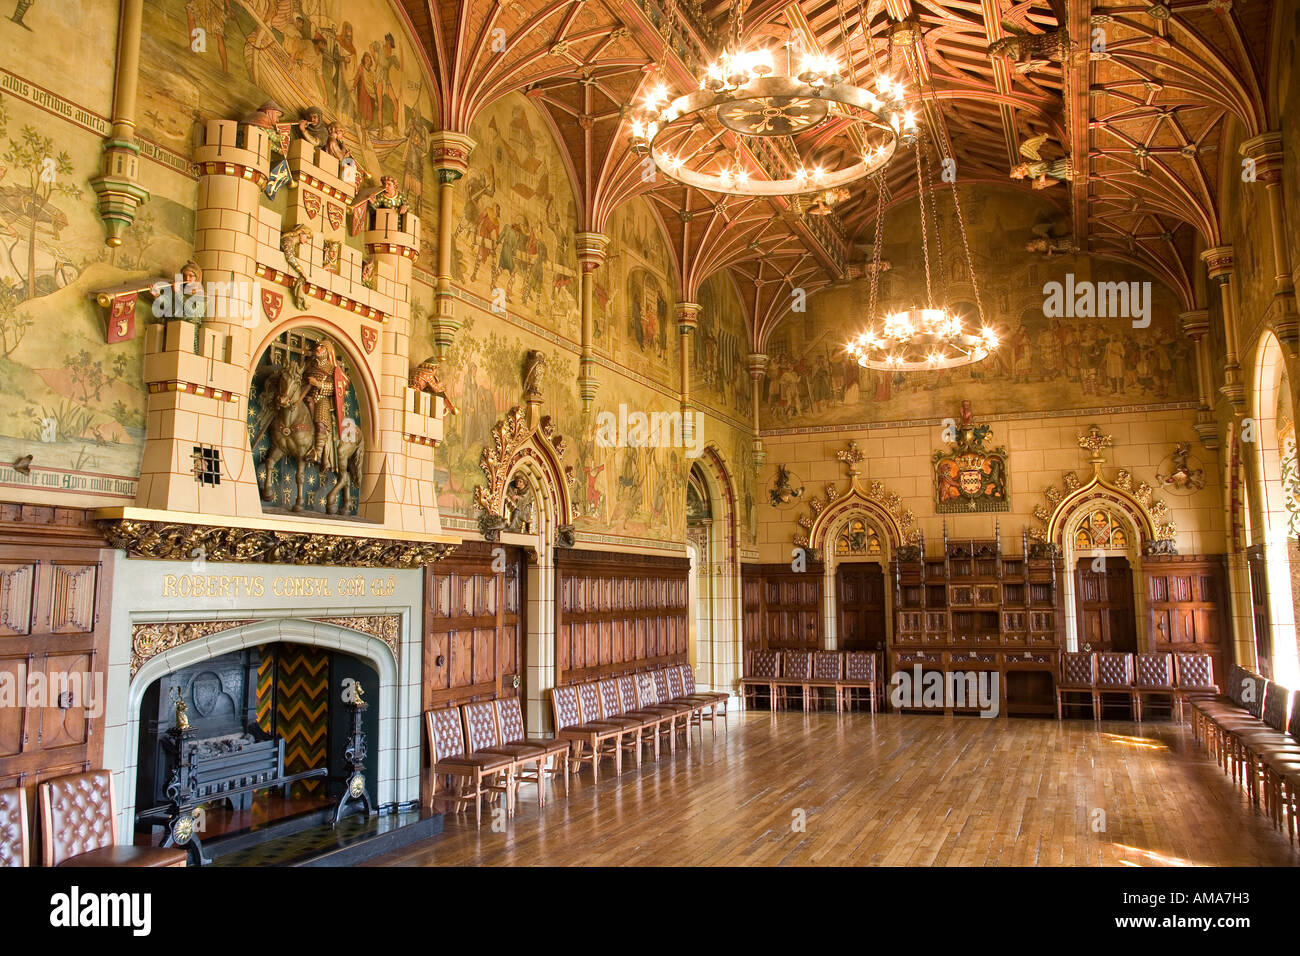 Wales Cardiff Castle Banqueting Hall fireplace and wooden ceiling Stock Photo